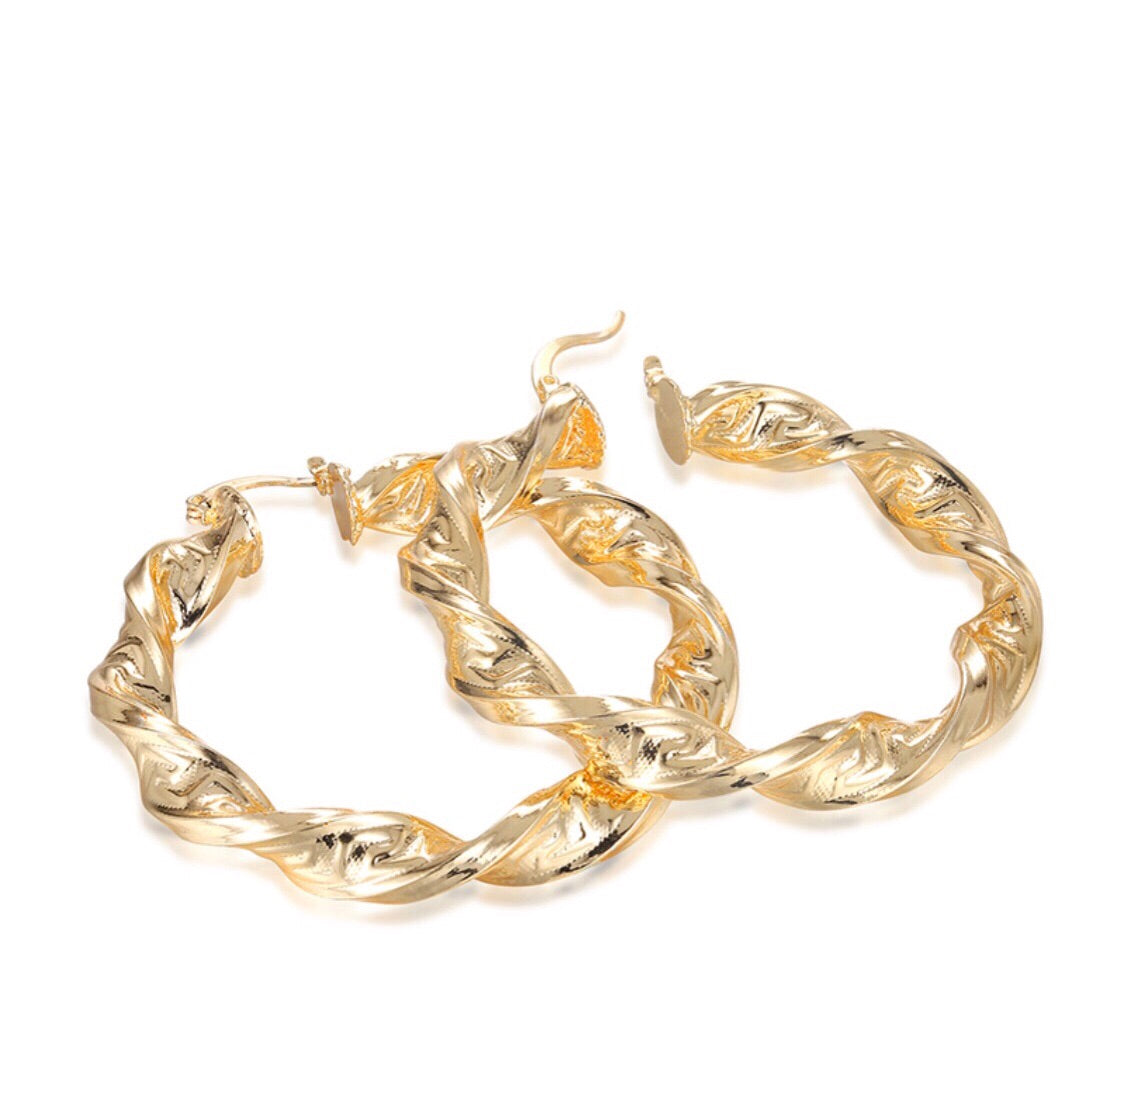 Twisted Gold Hoops